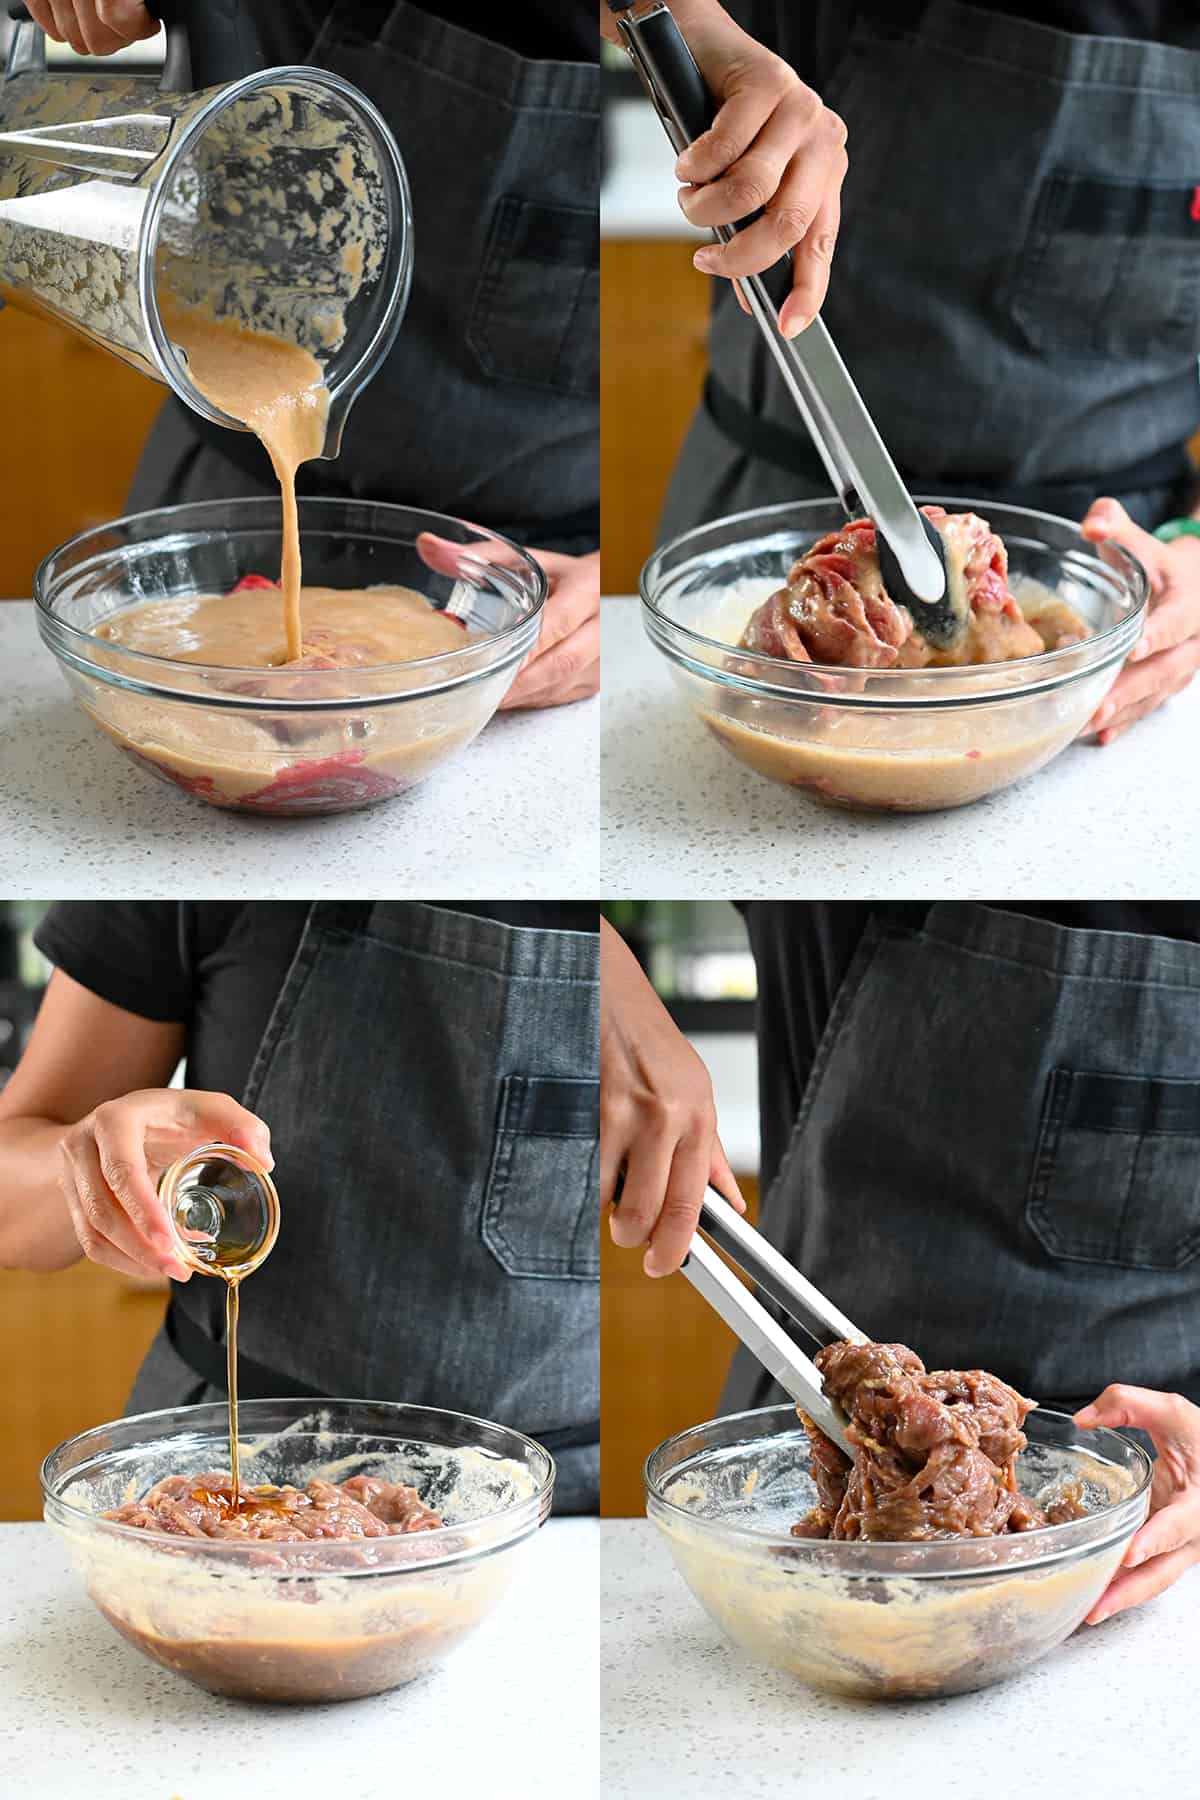 Four sequential shots that show a someone adding bulgogi sauce and toasted sesame oil to a bowl of thinly sliced raw steak and tossing everything together with tongs.